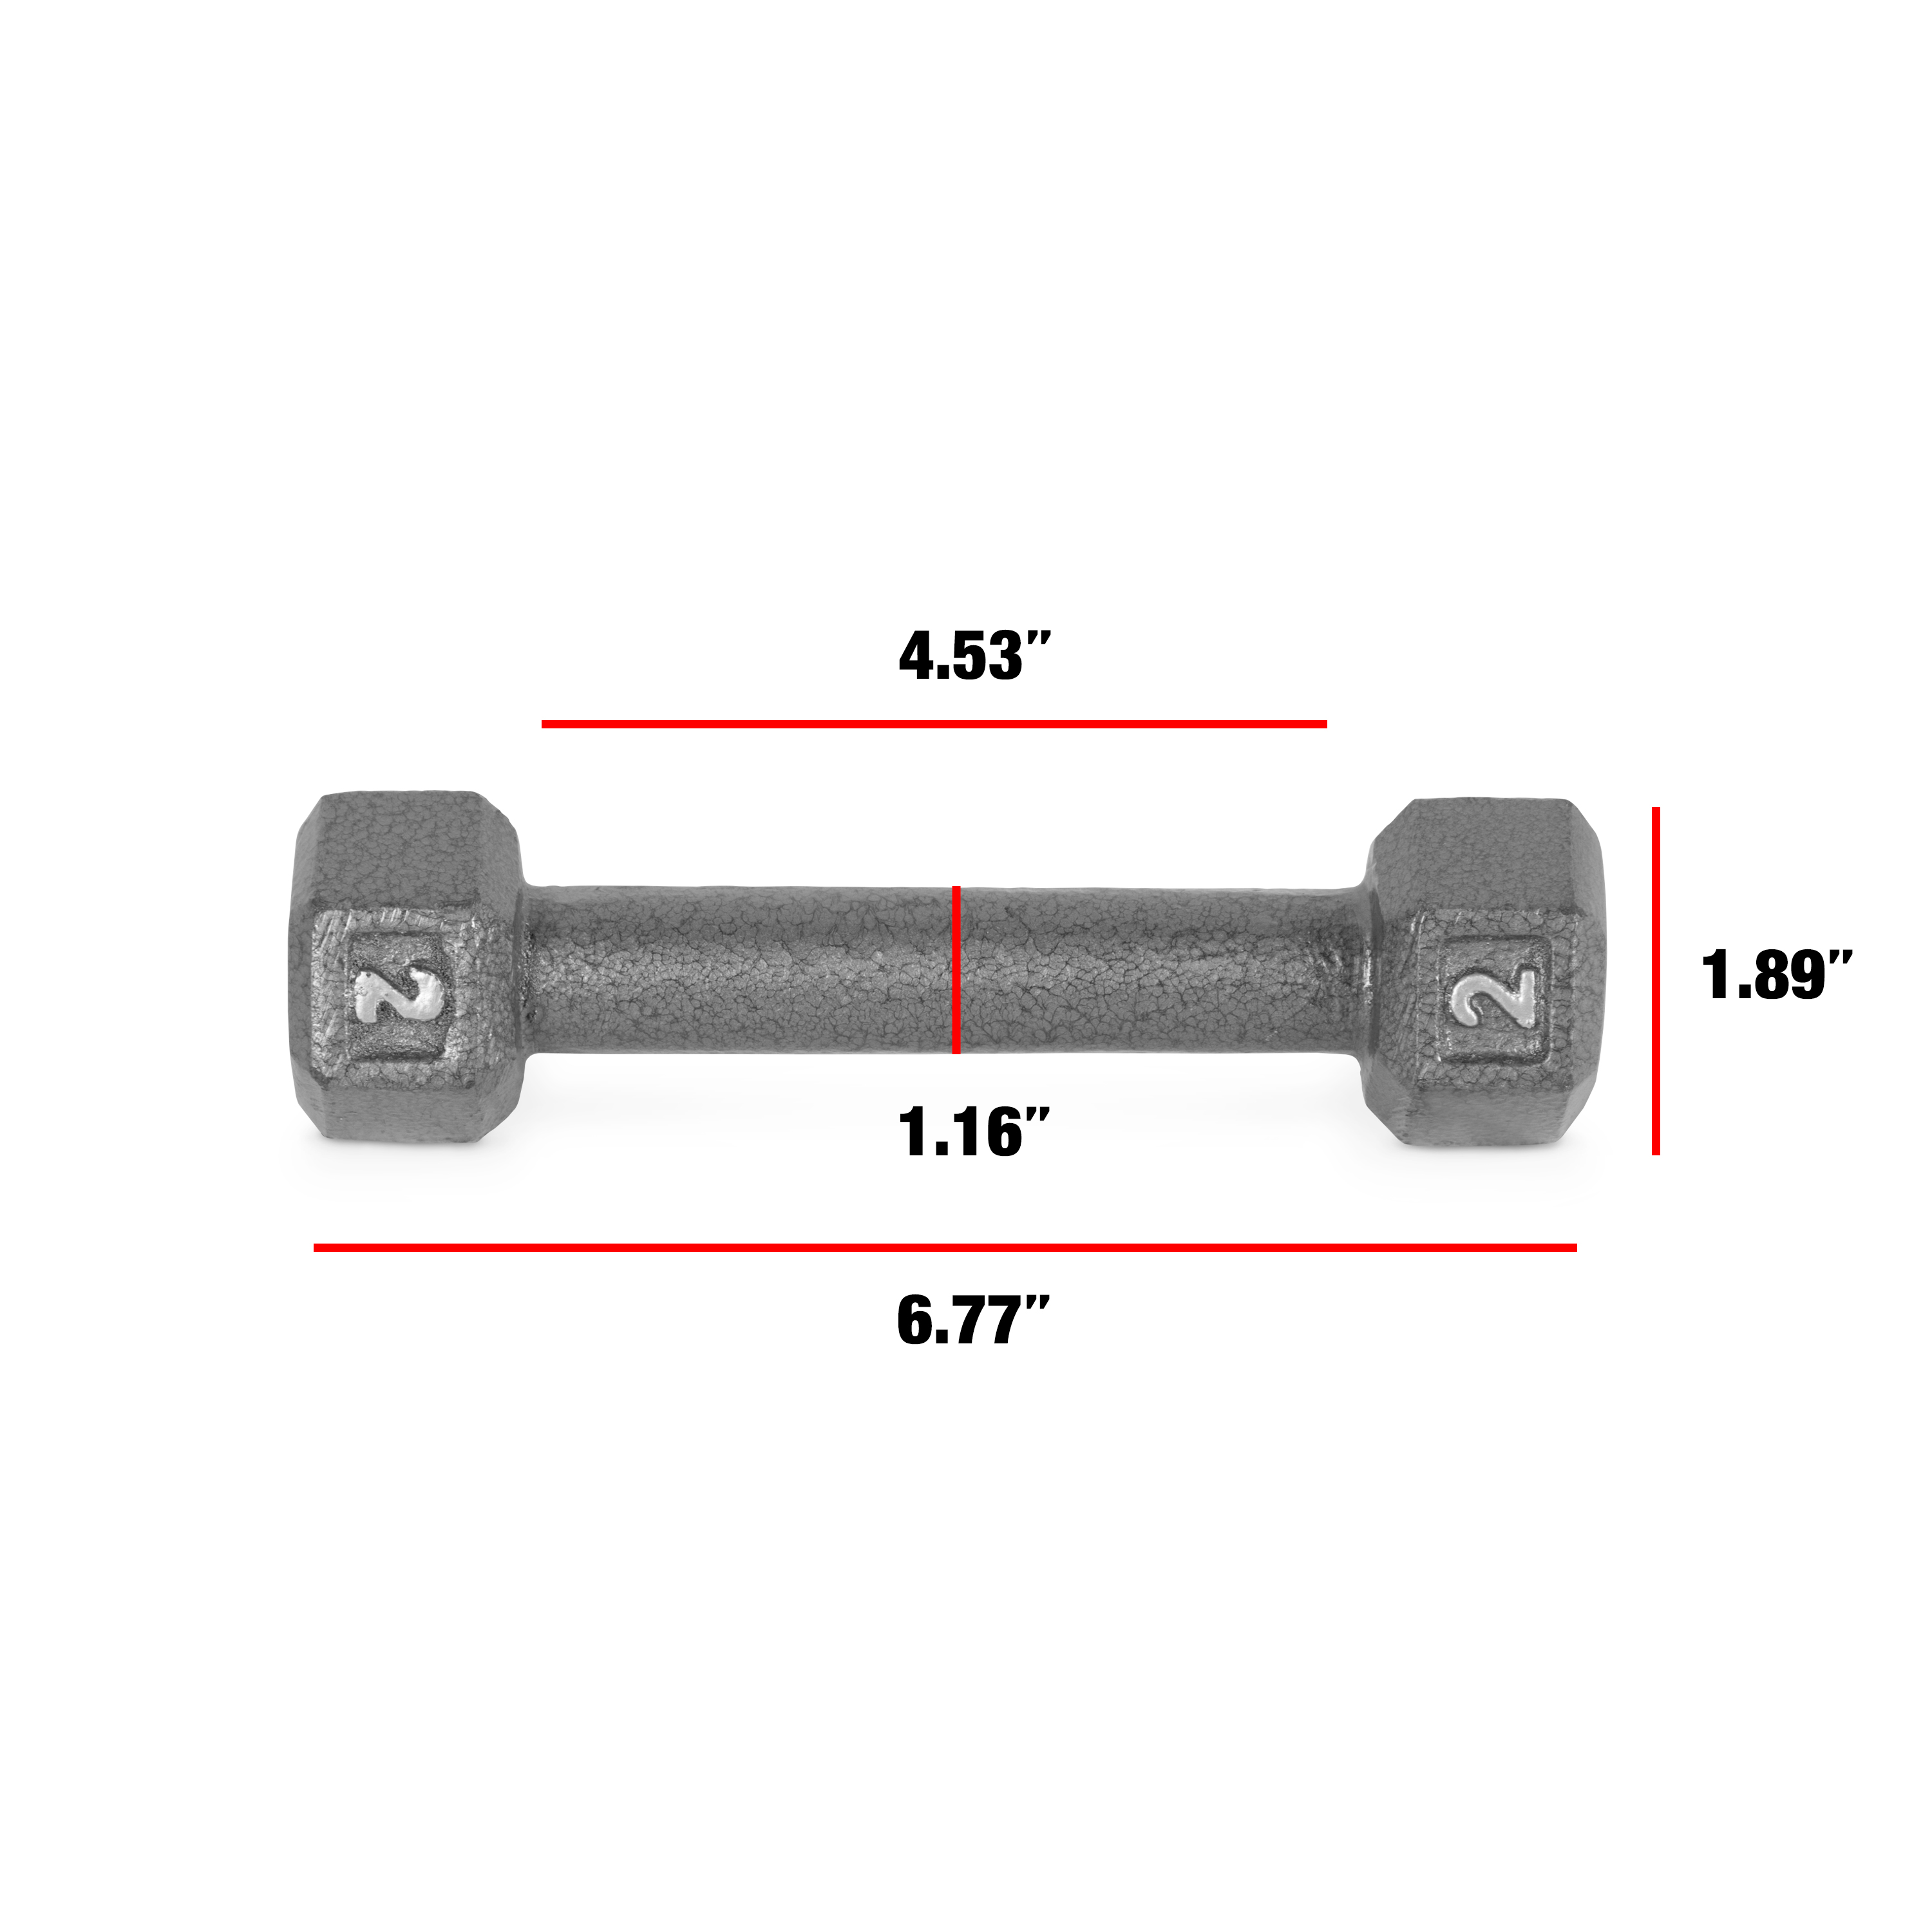 CAP Barbell 2lb Cast Iron Hex Dumbbell, Single - image 4 of 6